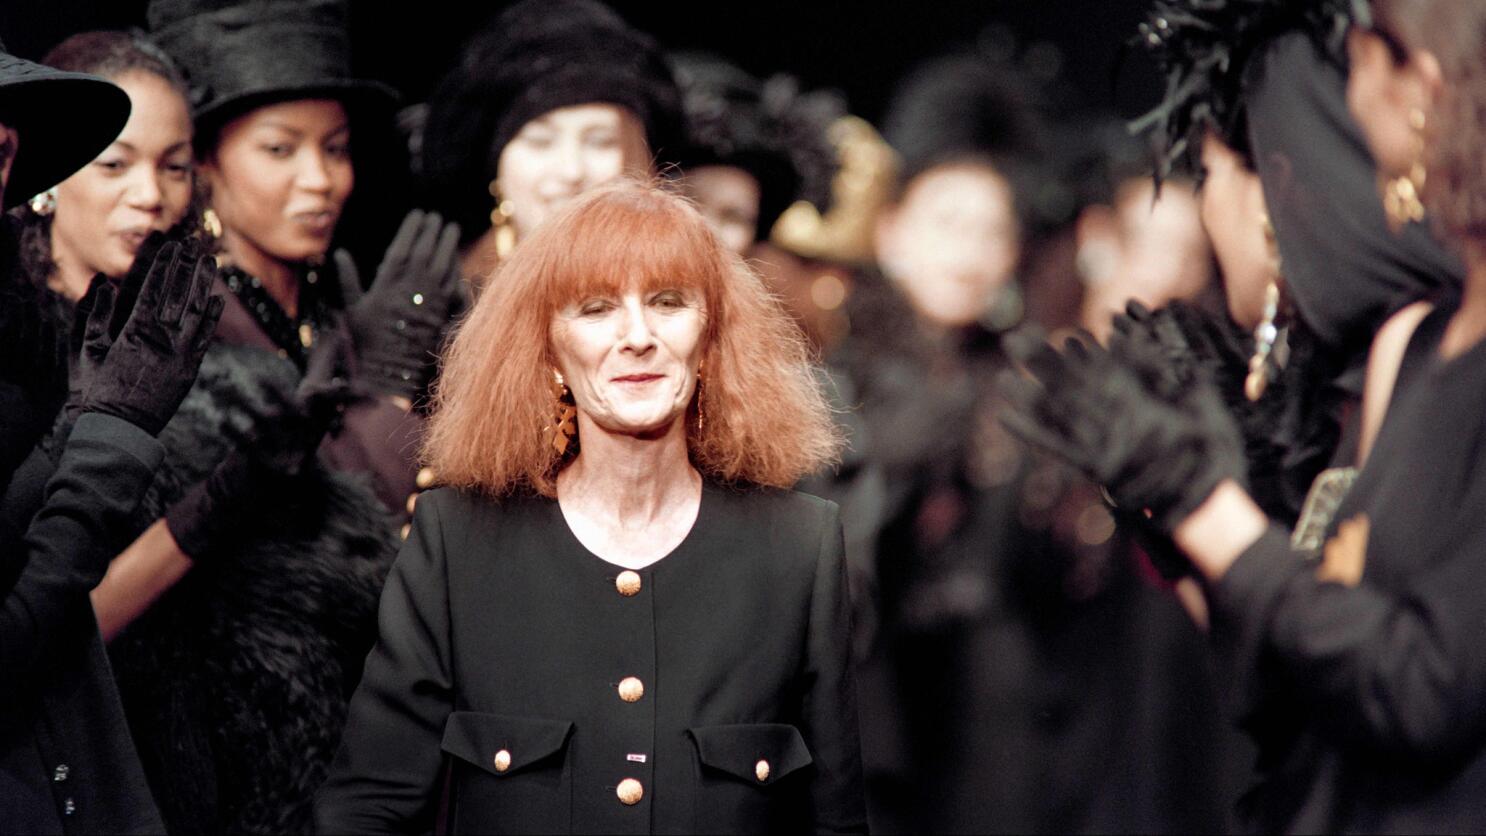 Sonia Rykiel, the fashion designer called 'the queen of knitwear,' dies - Los Angeles Times